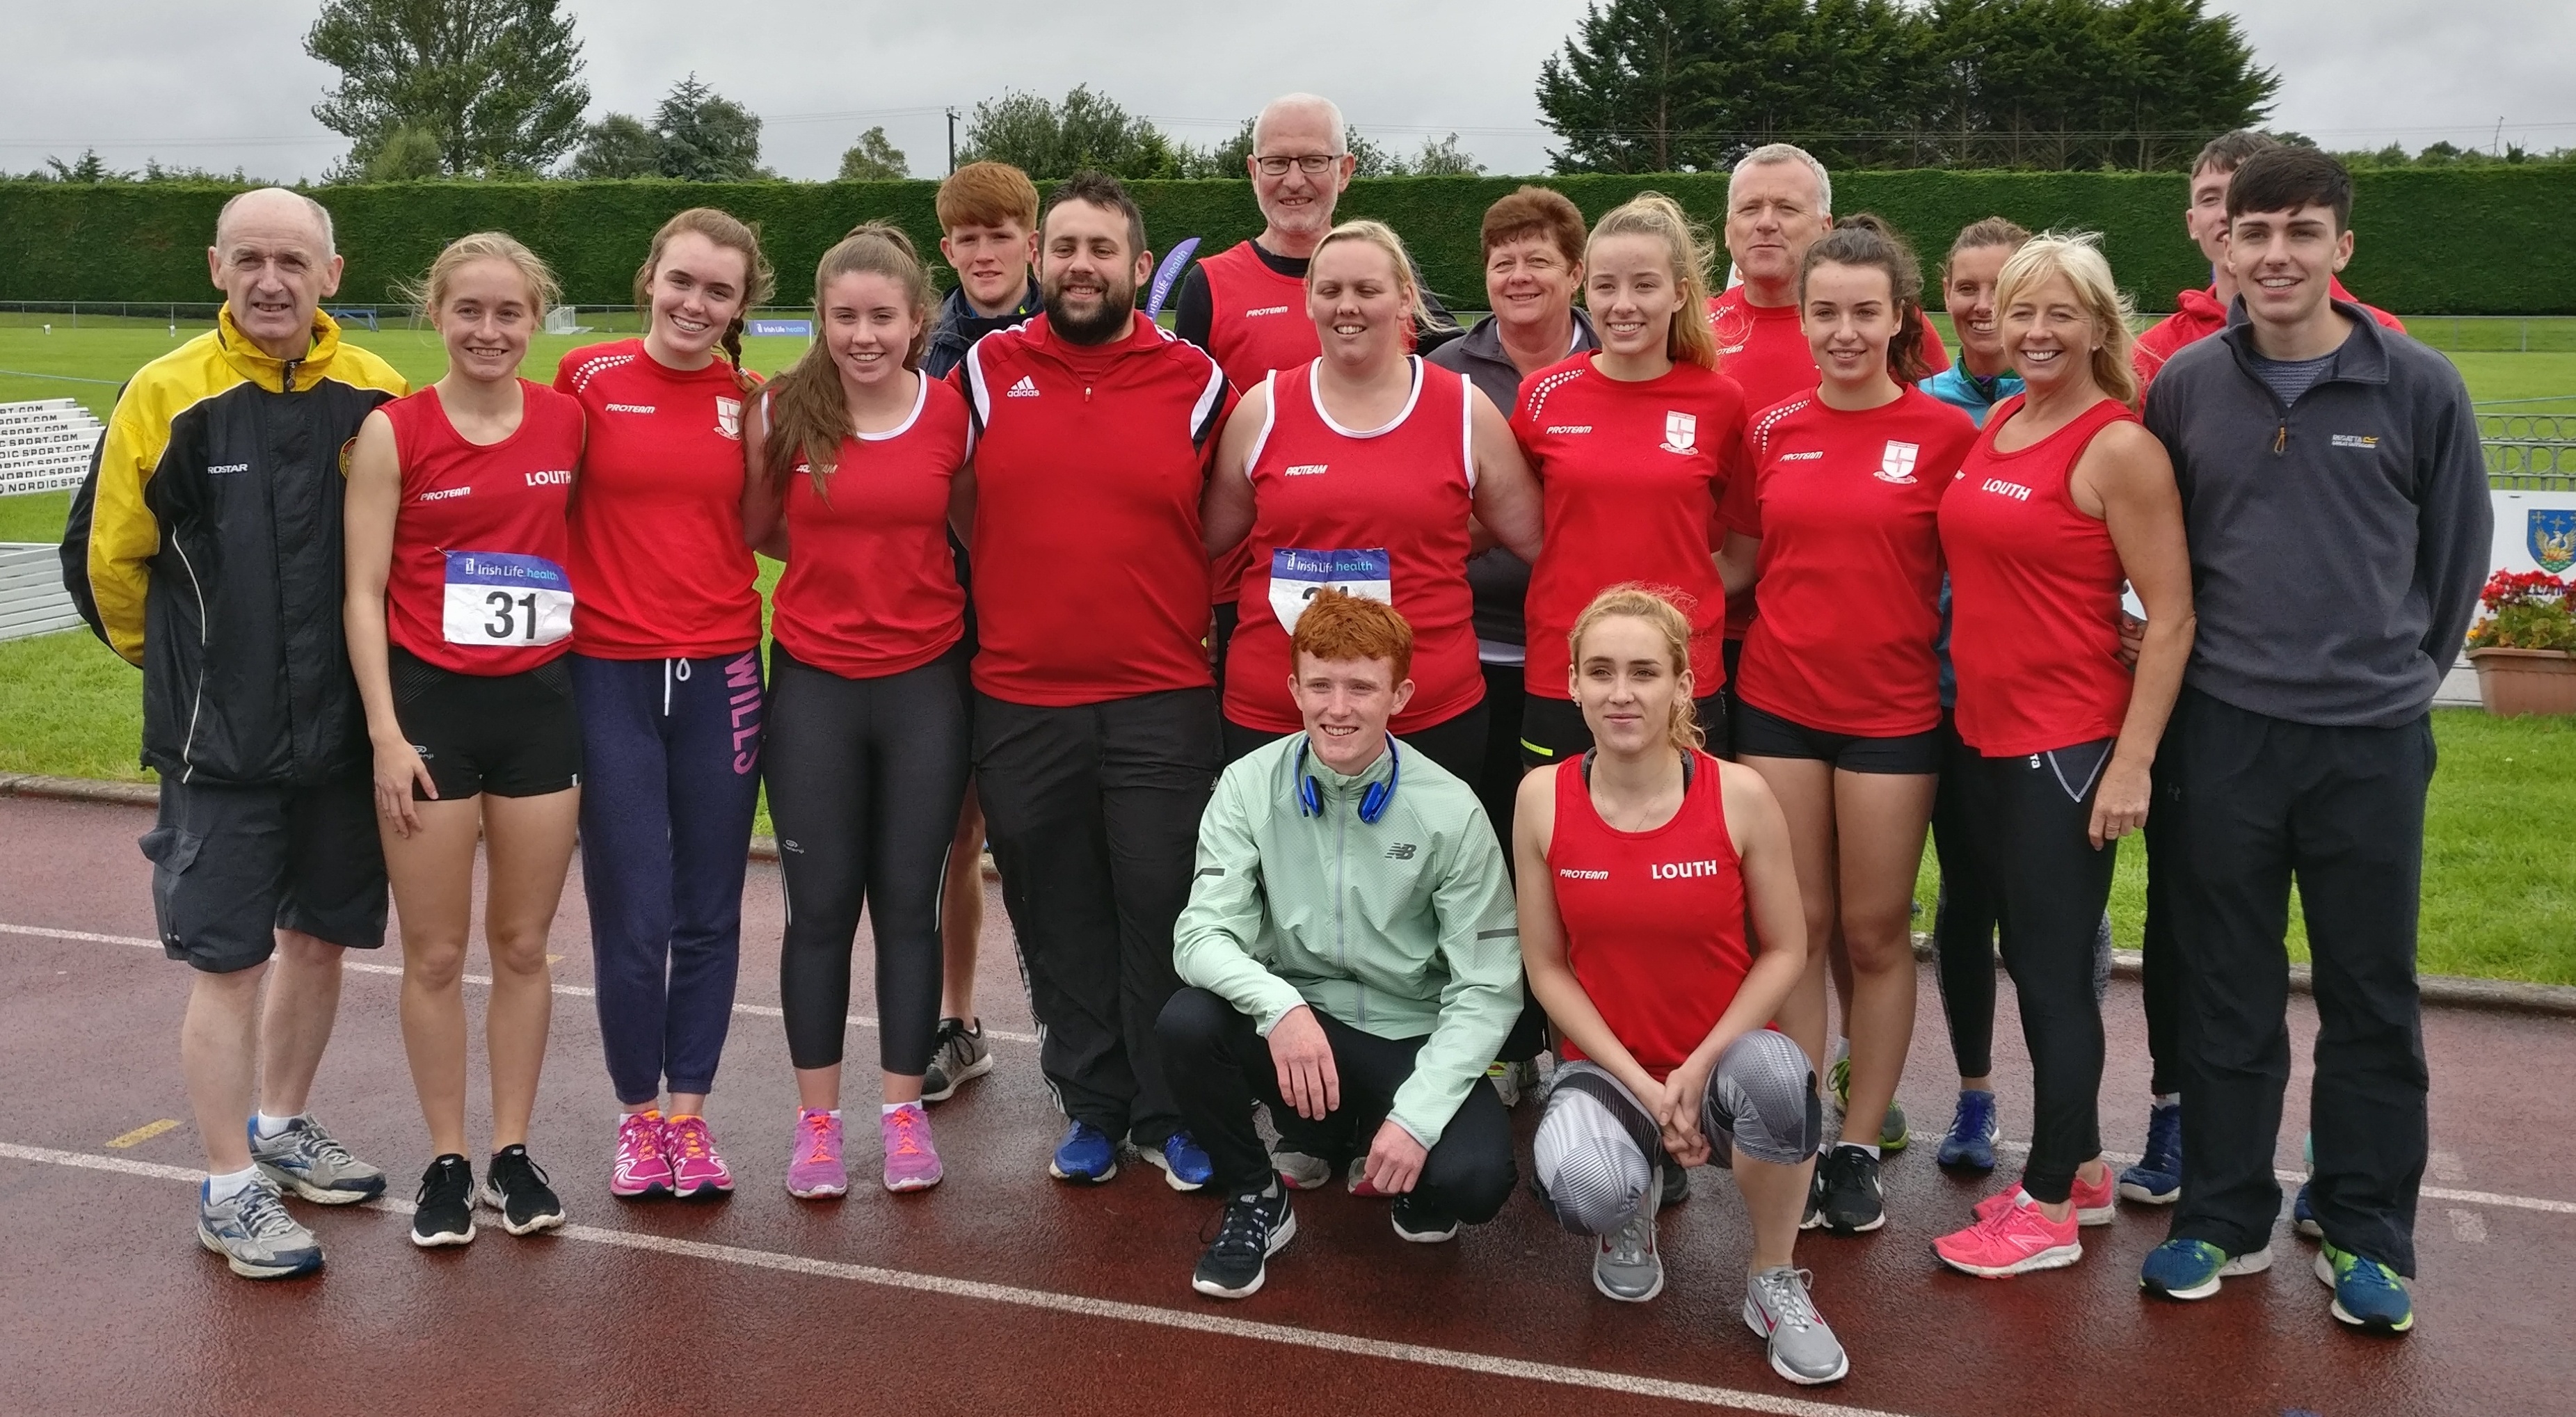 Louth athletes (including Tom McGrane) at Irish League Final (Tullamore, August 2017)